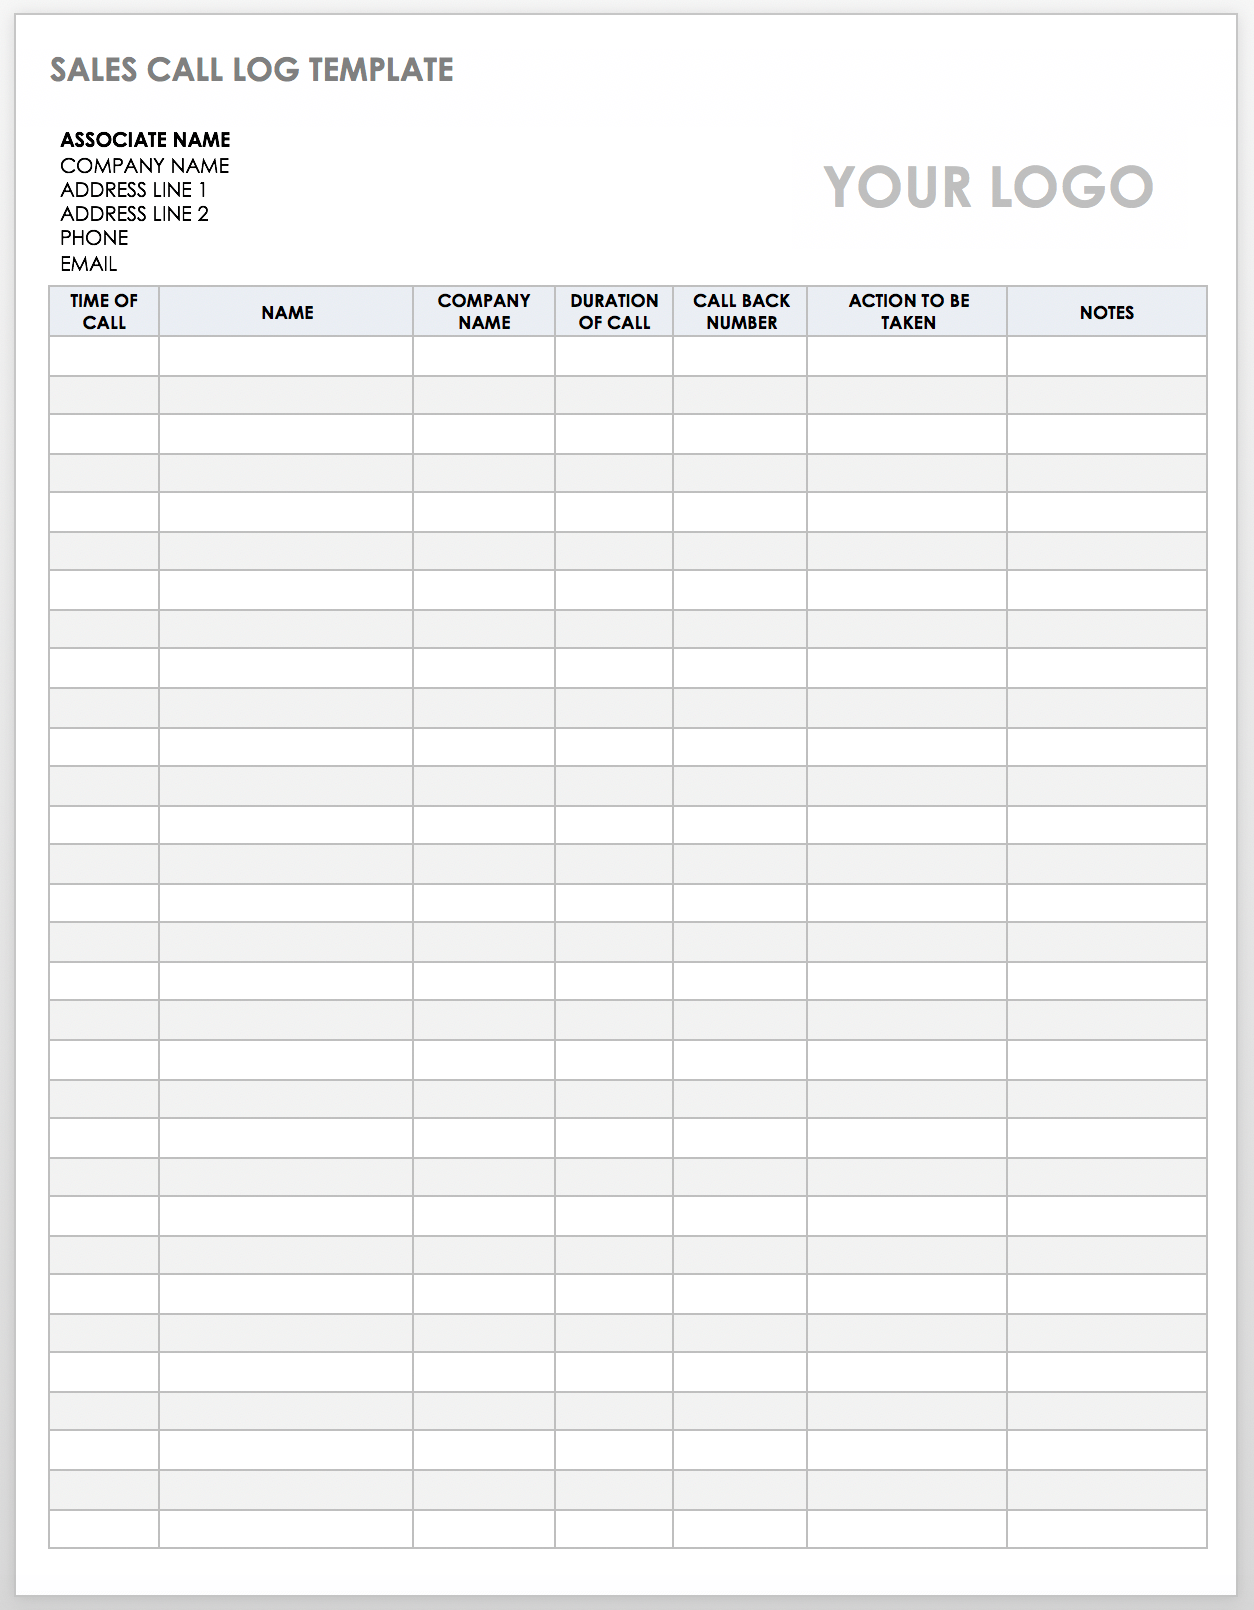 Free Client Call Log Templates  Smartsheet With Sales Visit Report Template Downloads